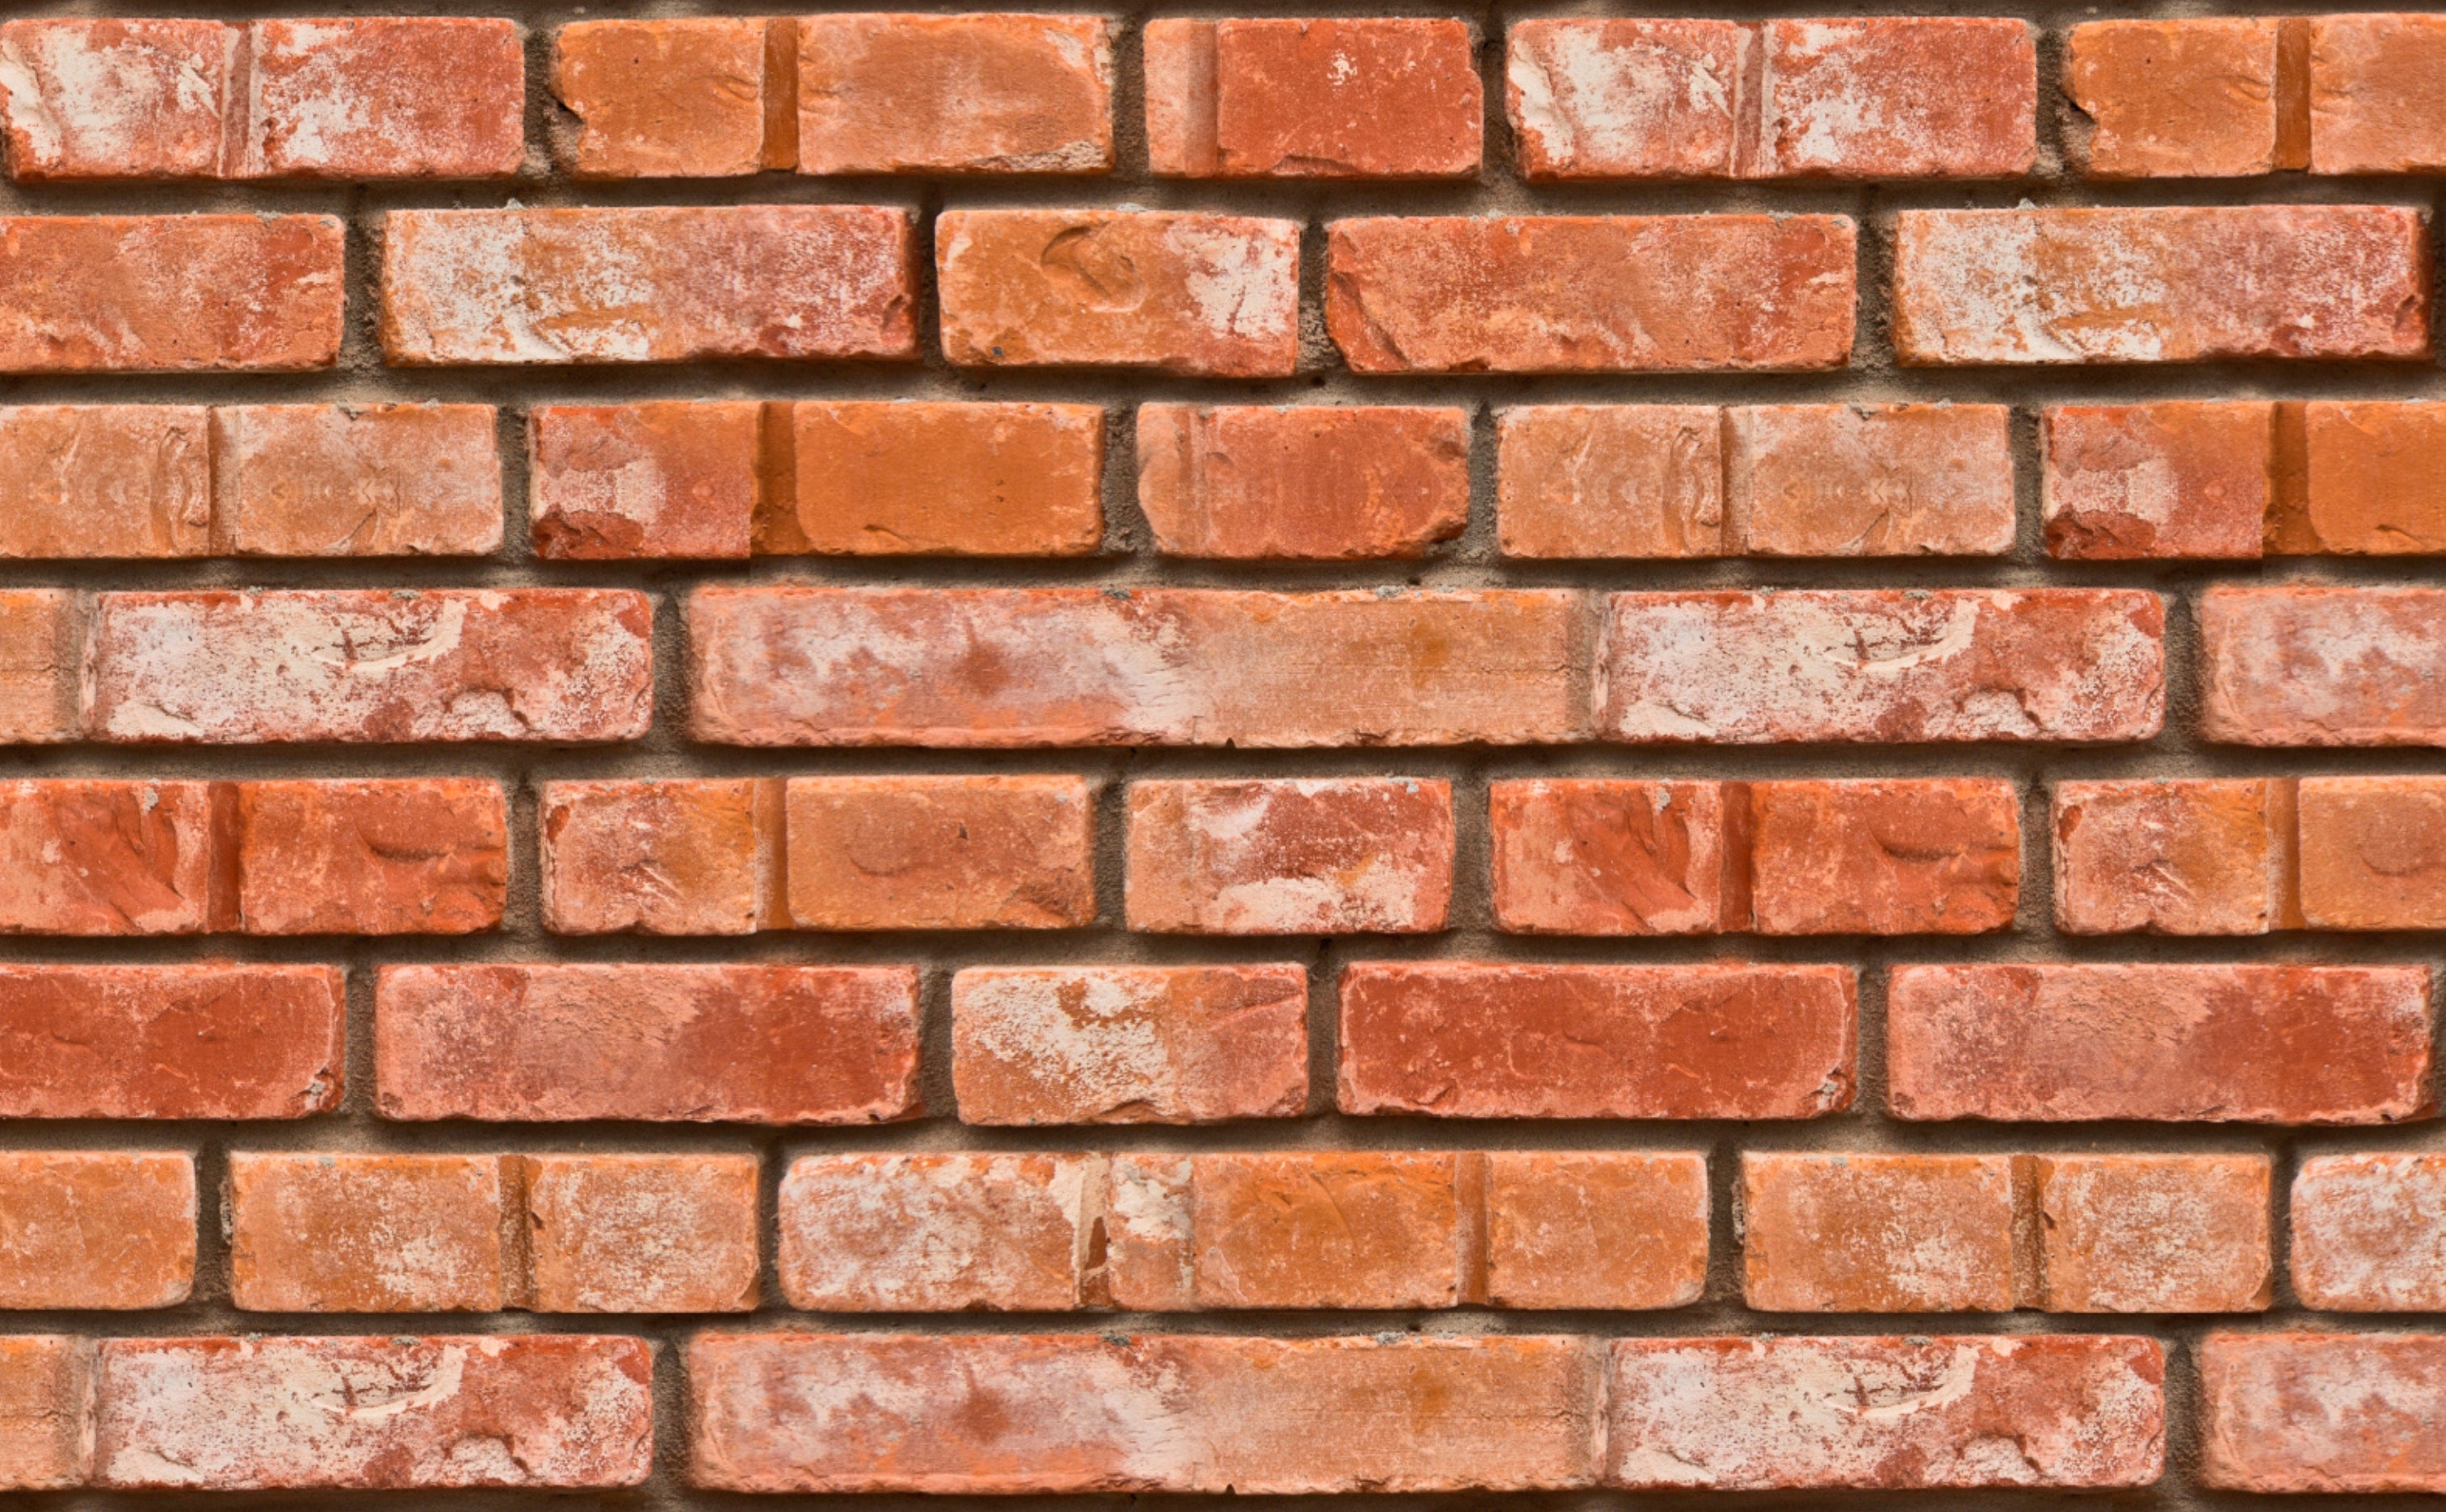 W0267 1s Realistic Bricks Removable Peel And Stick Wallpaper Repeating Pattern Sample 1 ?v=1604088879